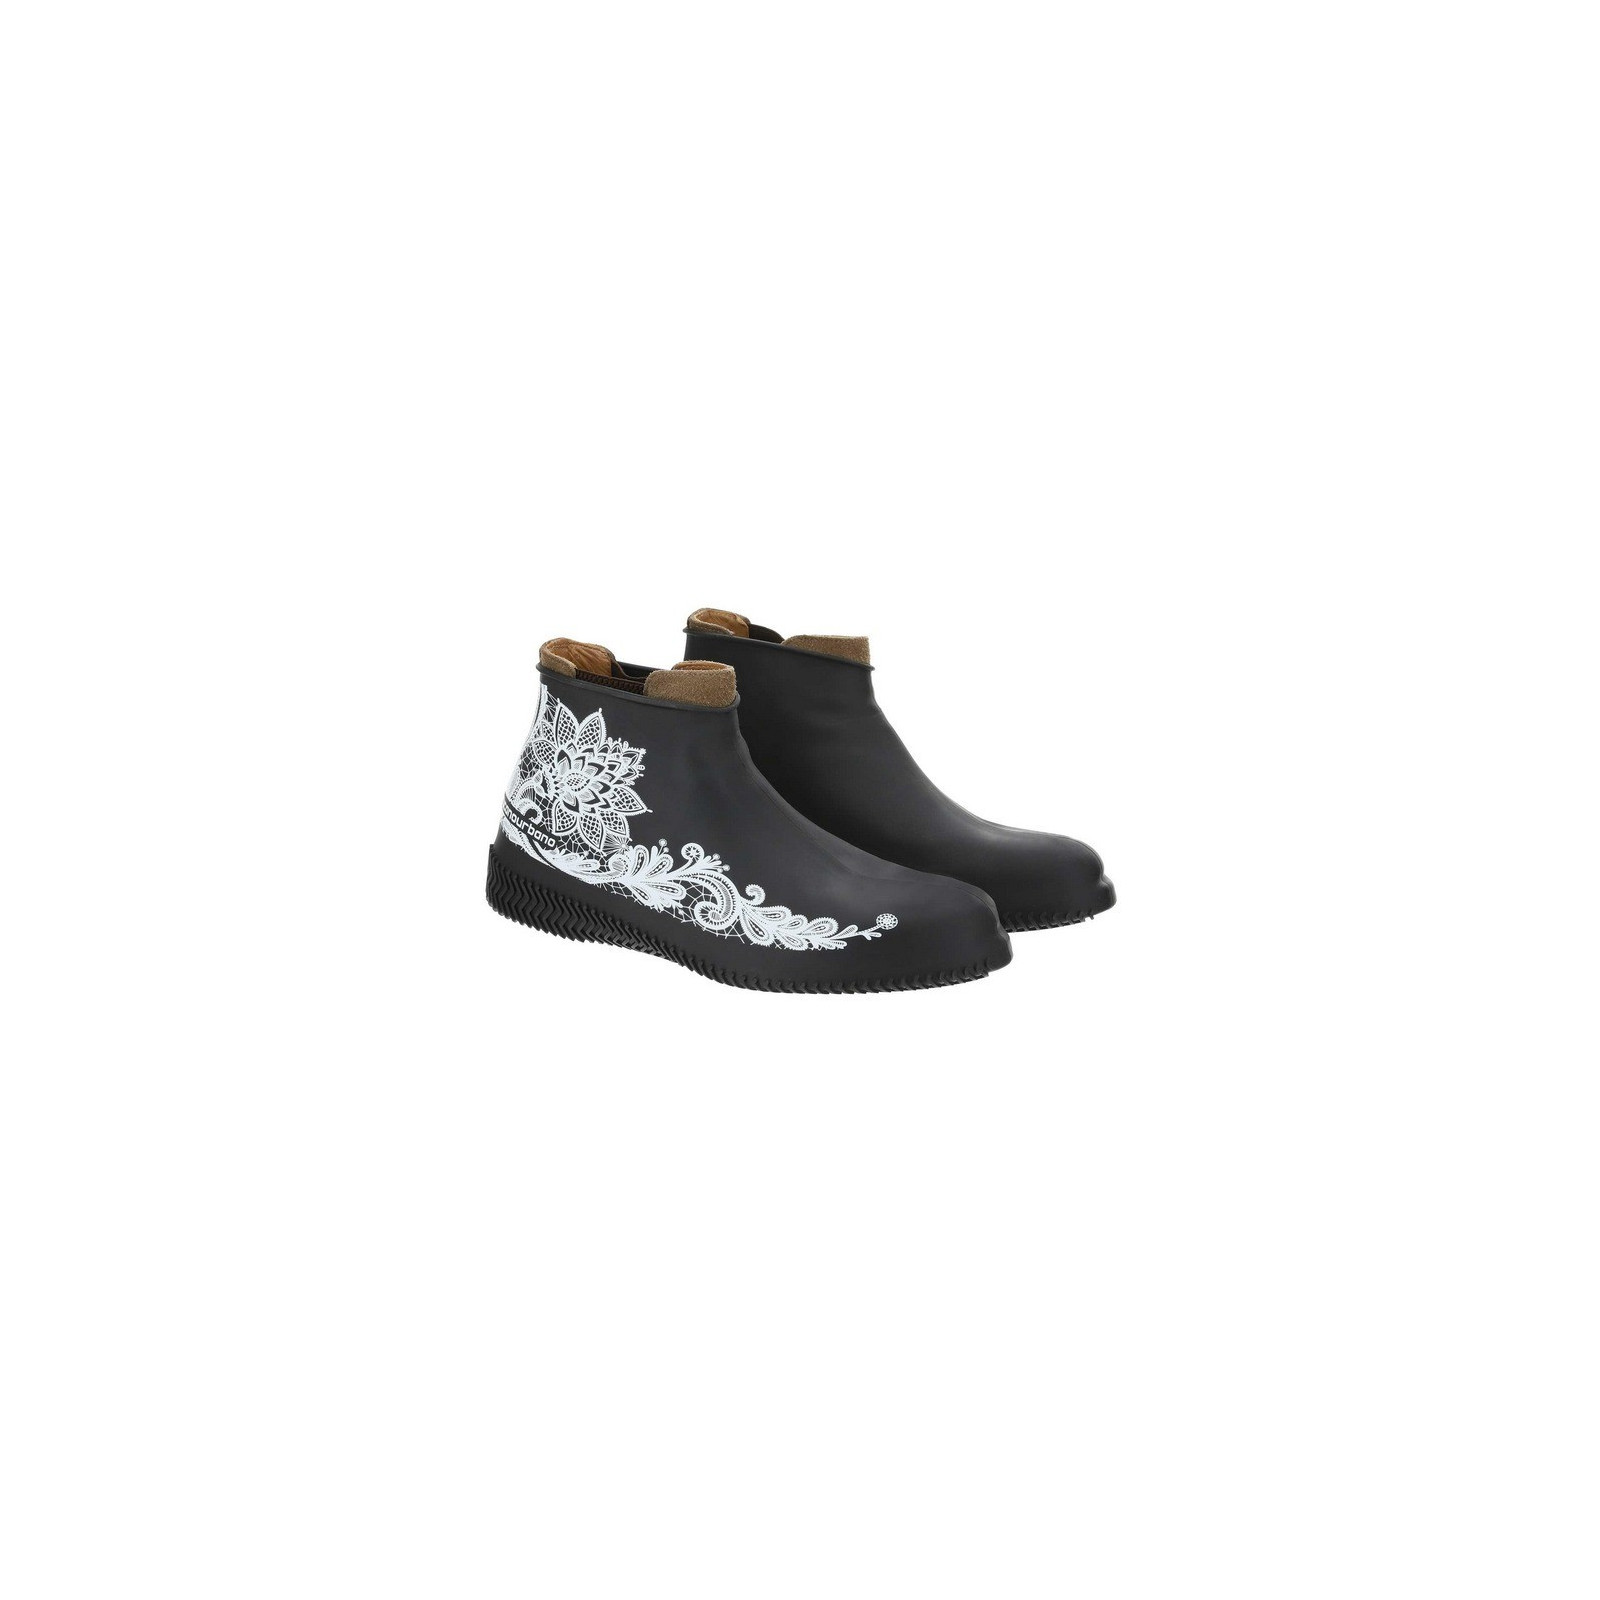 Couvre chaussures Footerine Tucano Urbano Noir